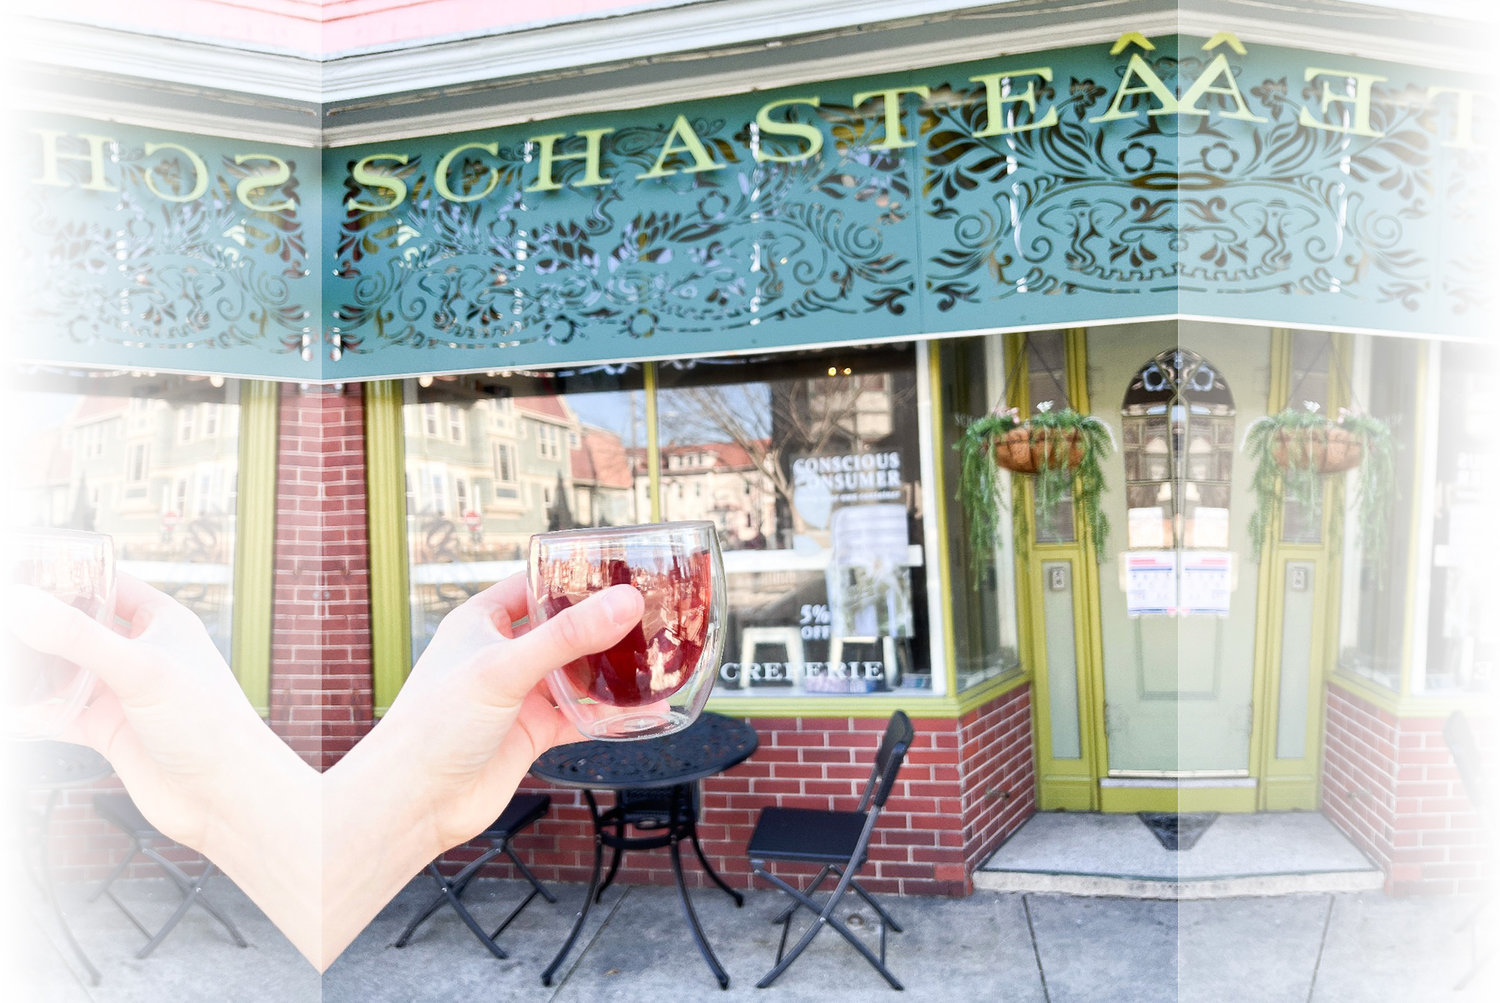 A tea house and creperie, Schasteâ encourages guests to slow down and enjoy the moment